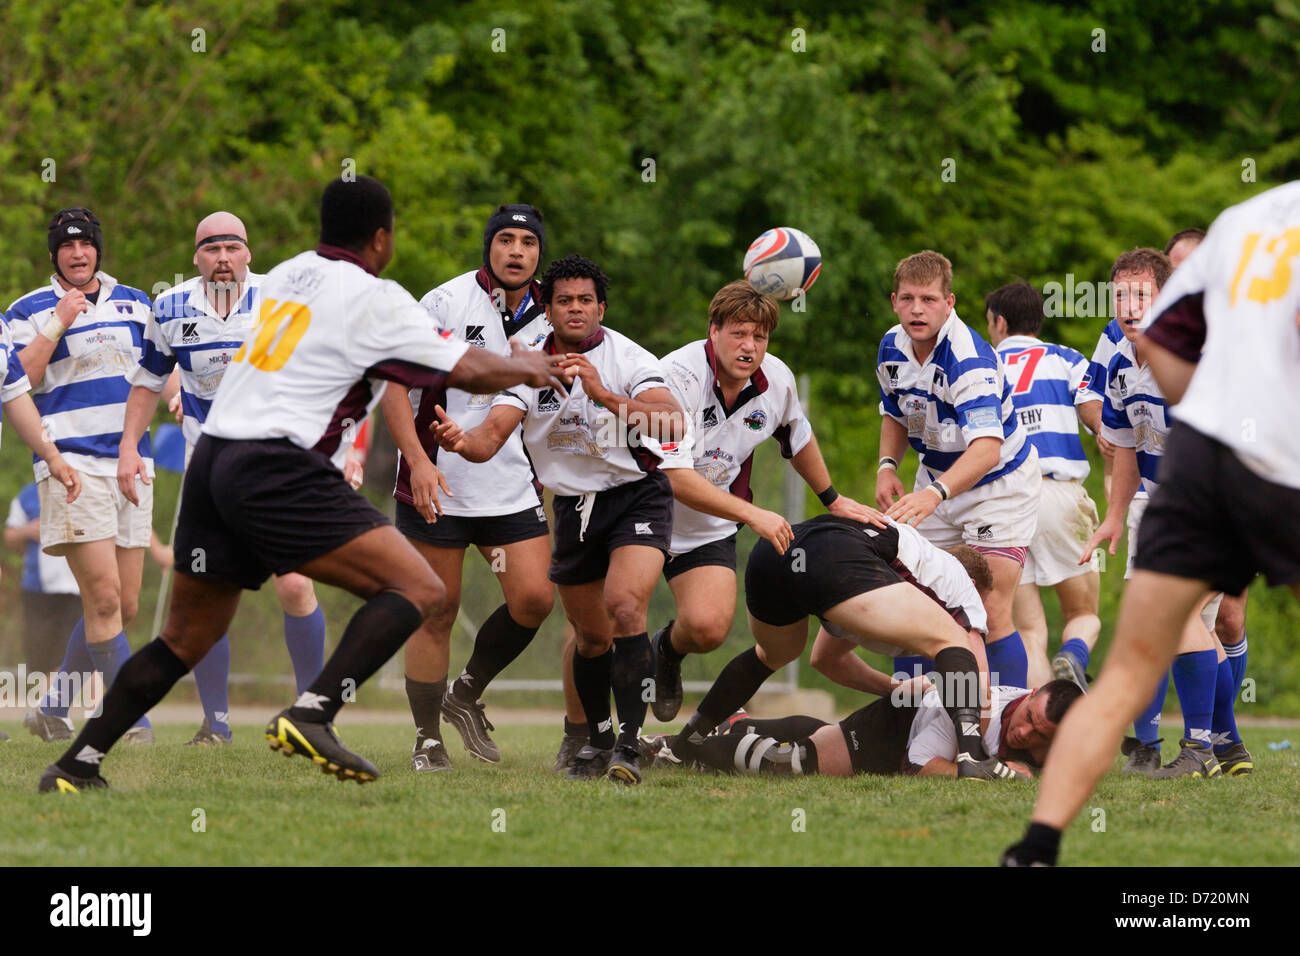 The Old Puget Sound Beach Rugby Football and Washington Rugby Football clubs battle during a match at Cardozo High School field. Stock Photo